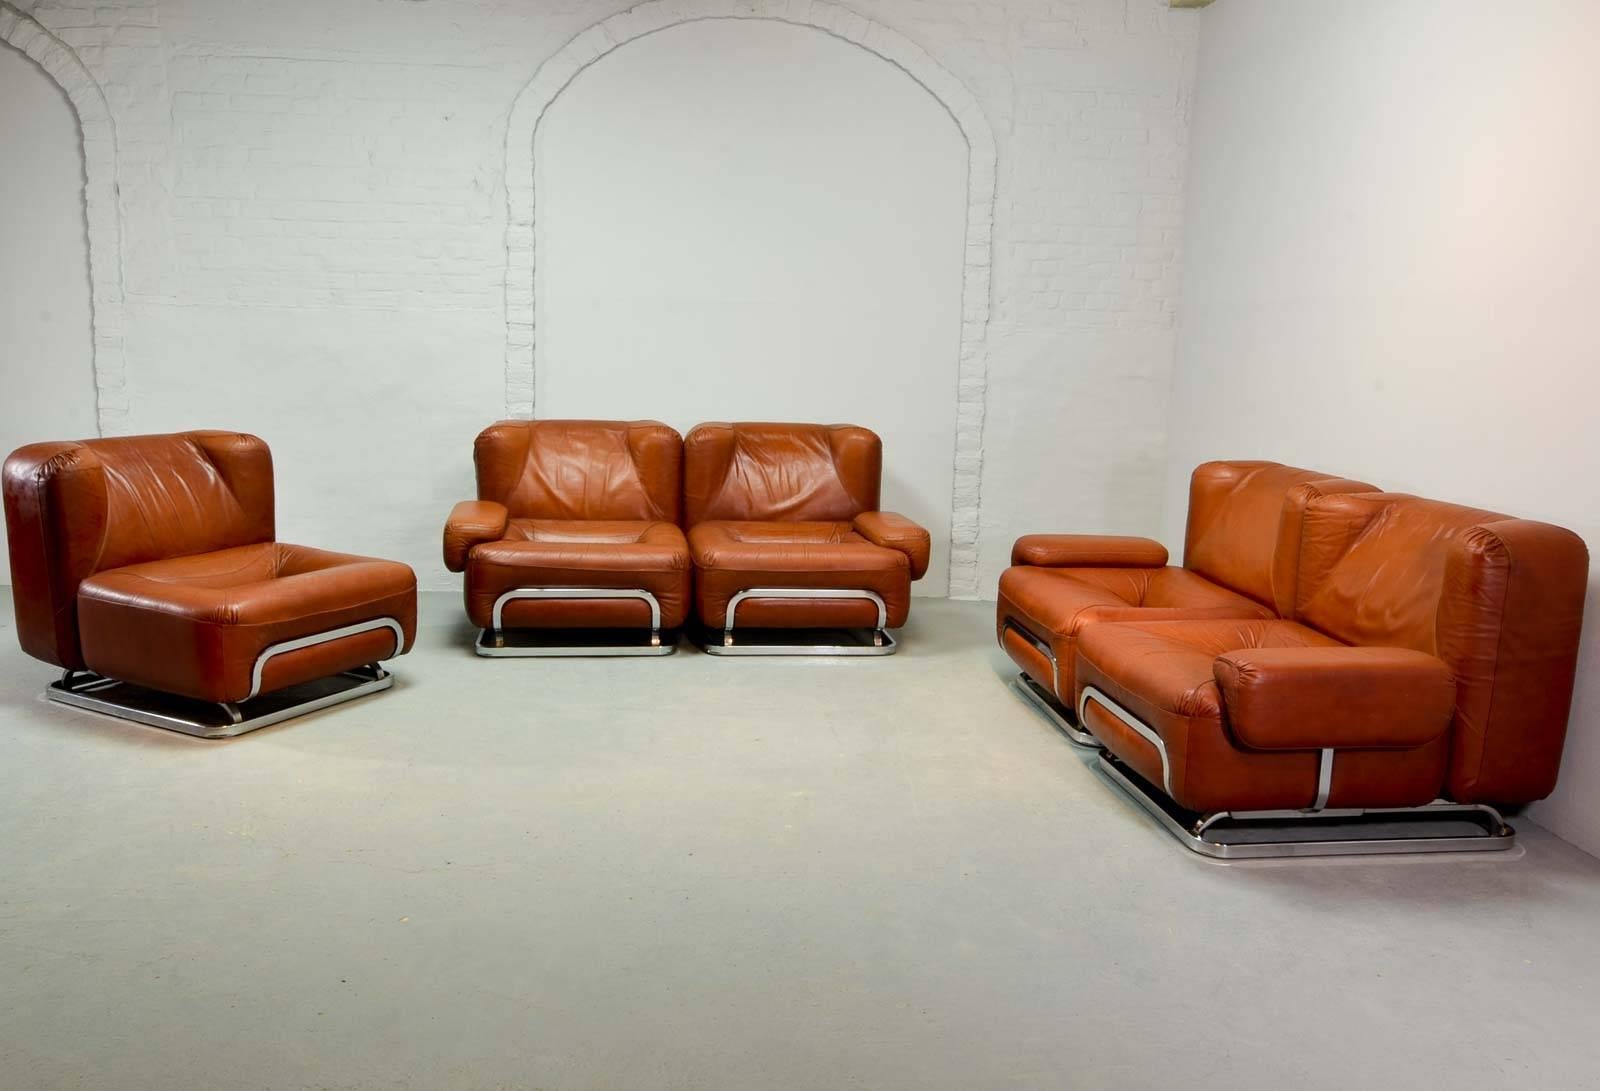 Chestnut Brown Leather Two-Seater Sofa in Style of Tobia Scarpa, 1970s For Sale 2